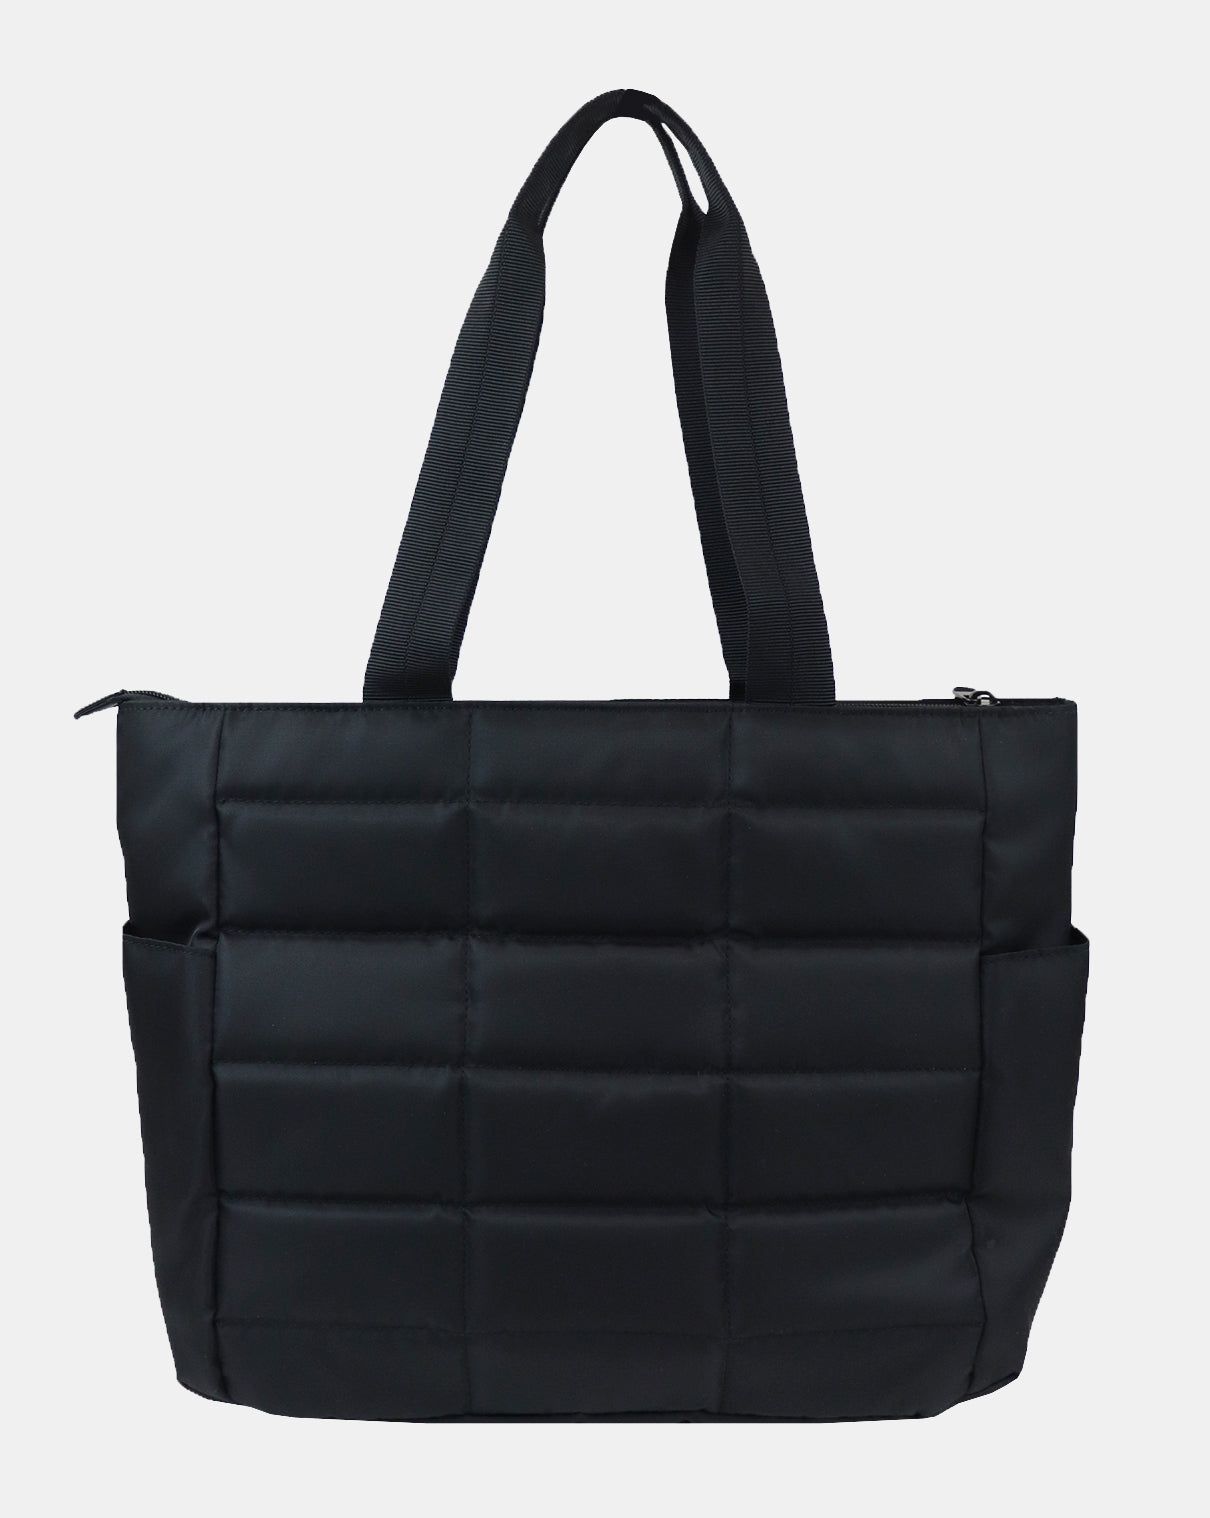 Hedgren Camden Sustainably Made Tote Black